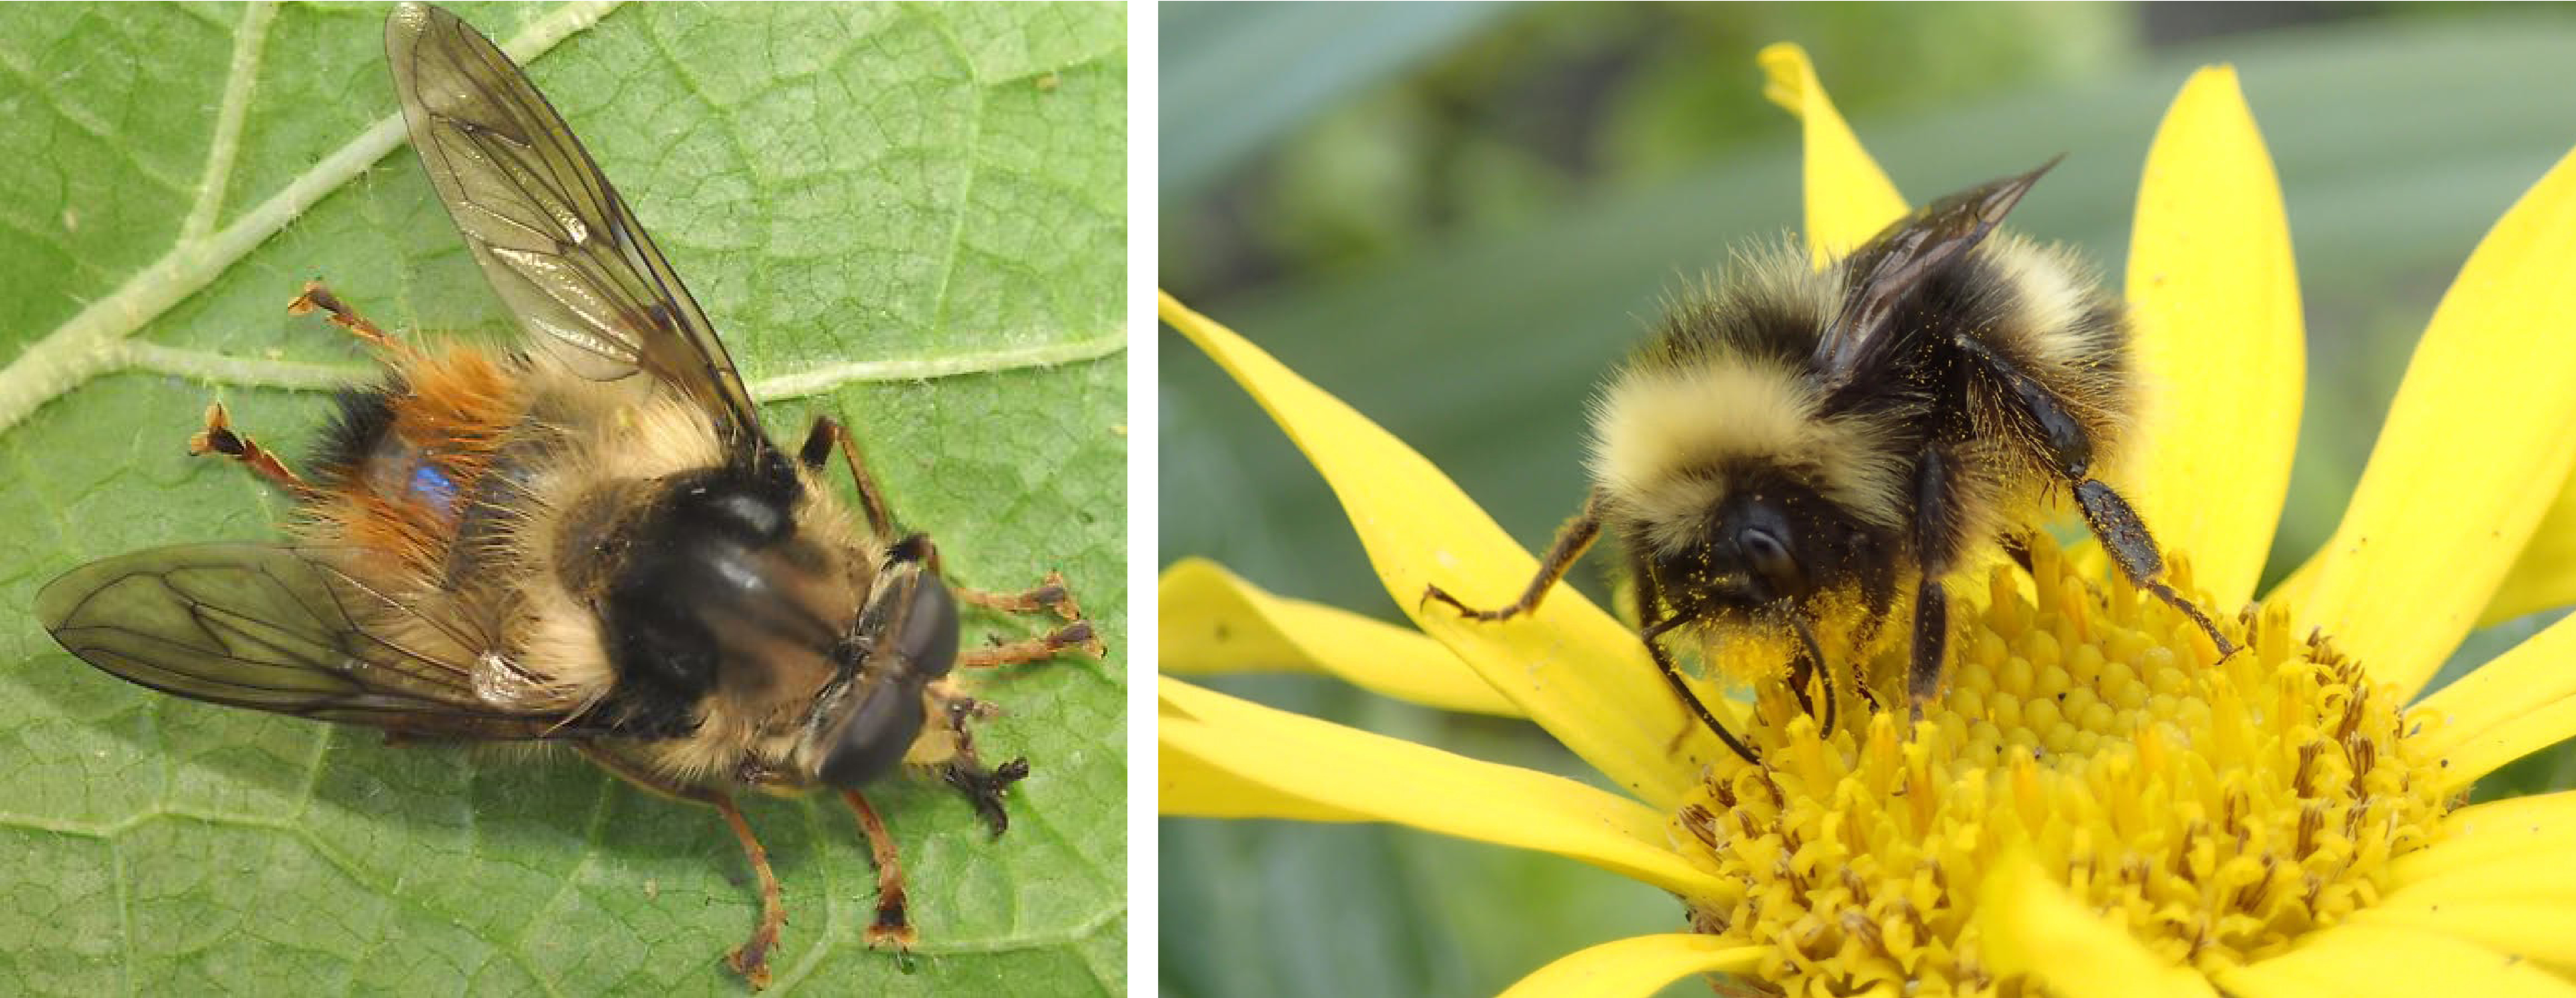 side by side comparison of two bugs that look like bees